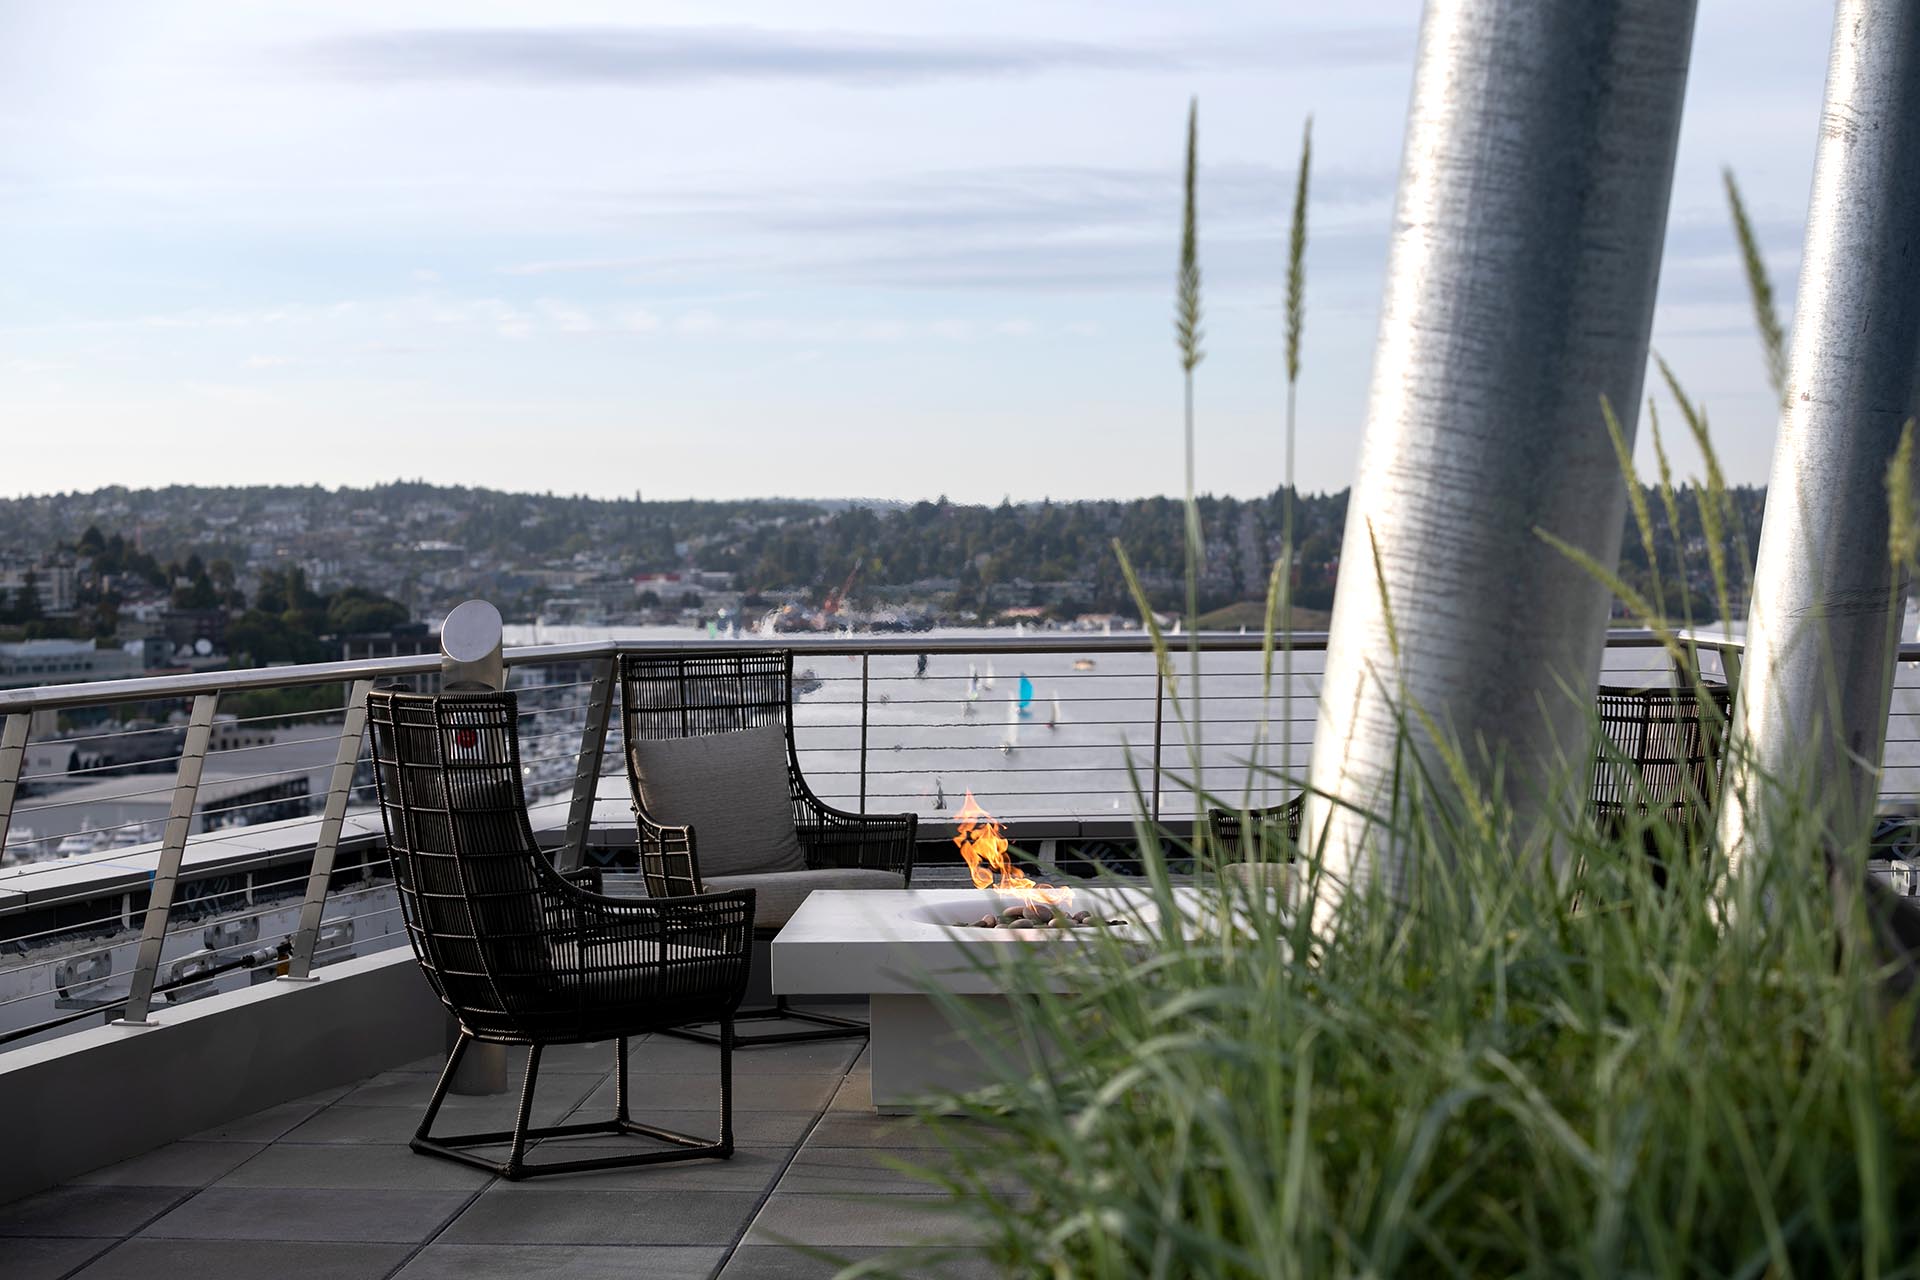 A small mounted firepit on the deck, encircled by outdoor seating, and the city/lake in the background